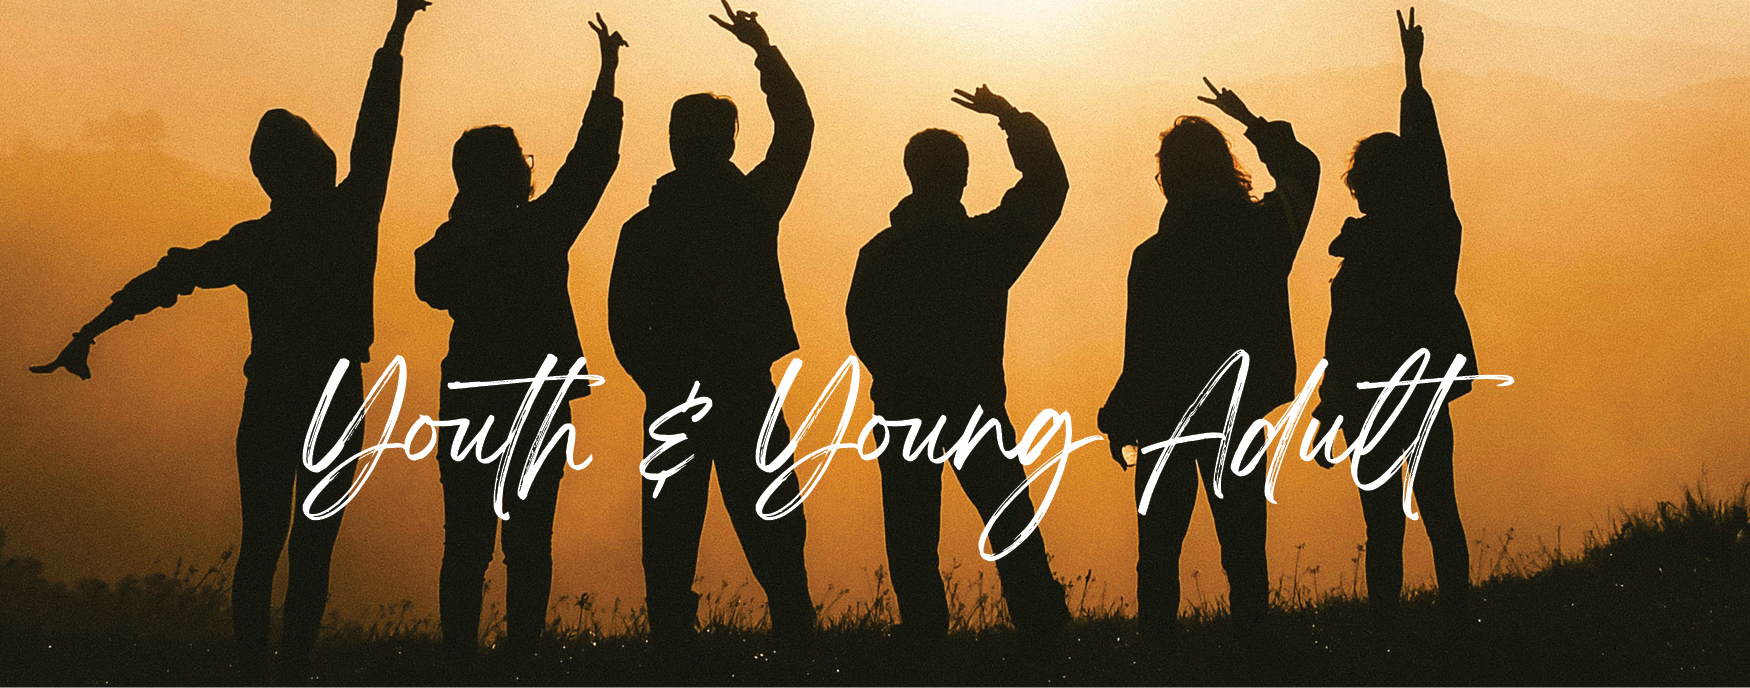 Youth and Young Adult